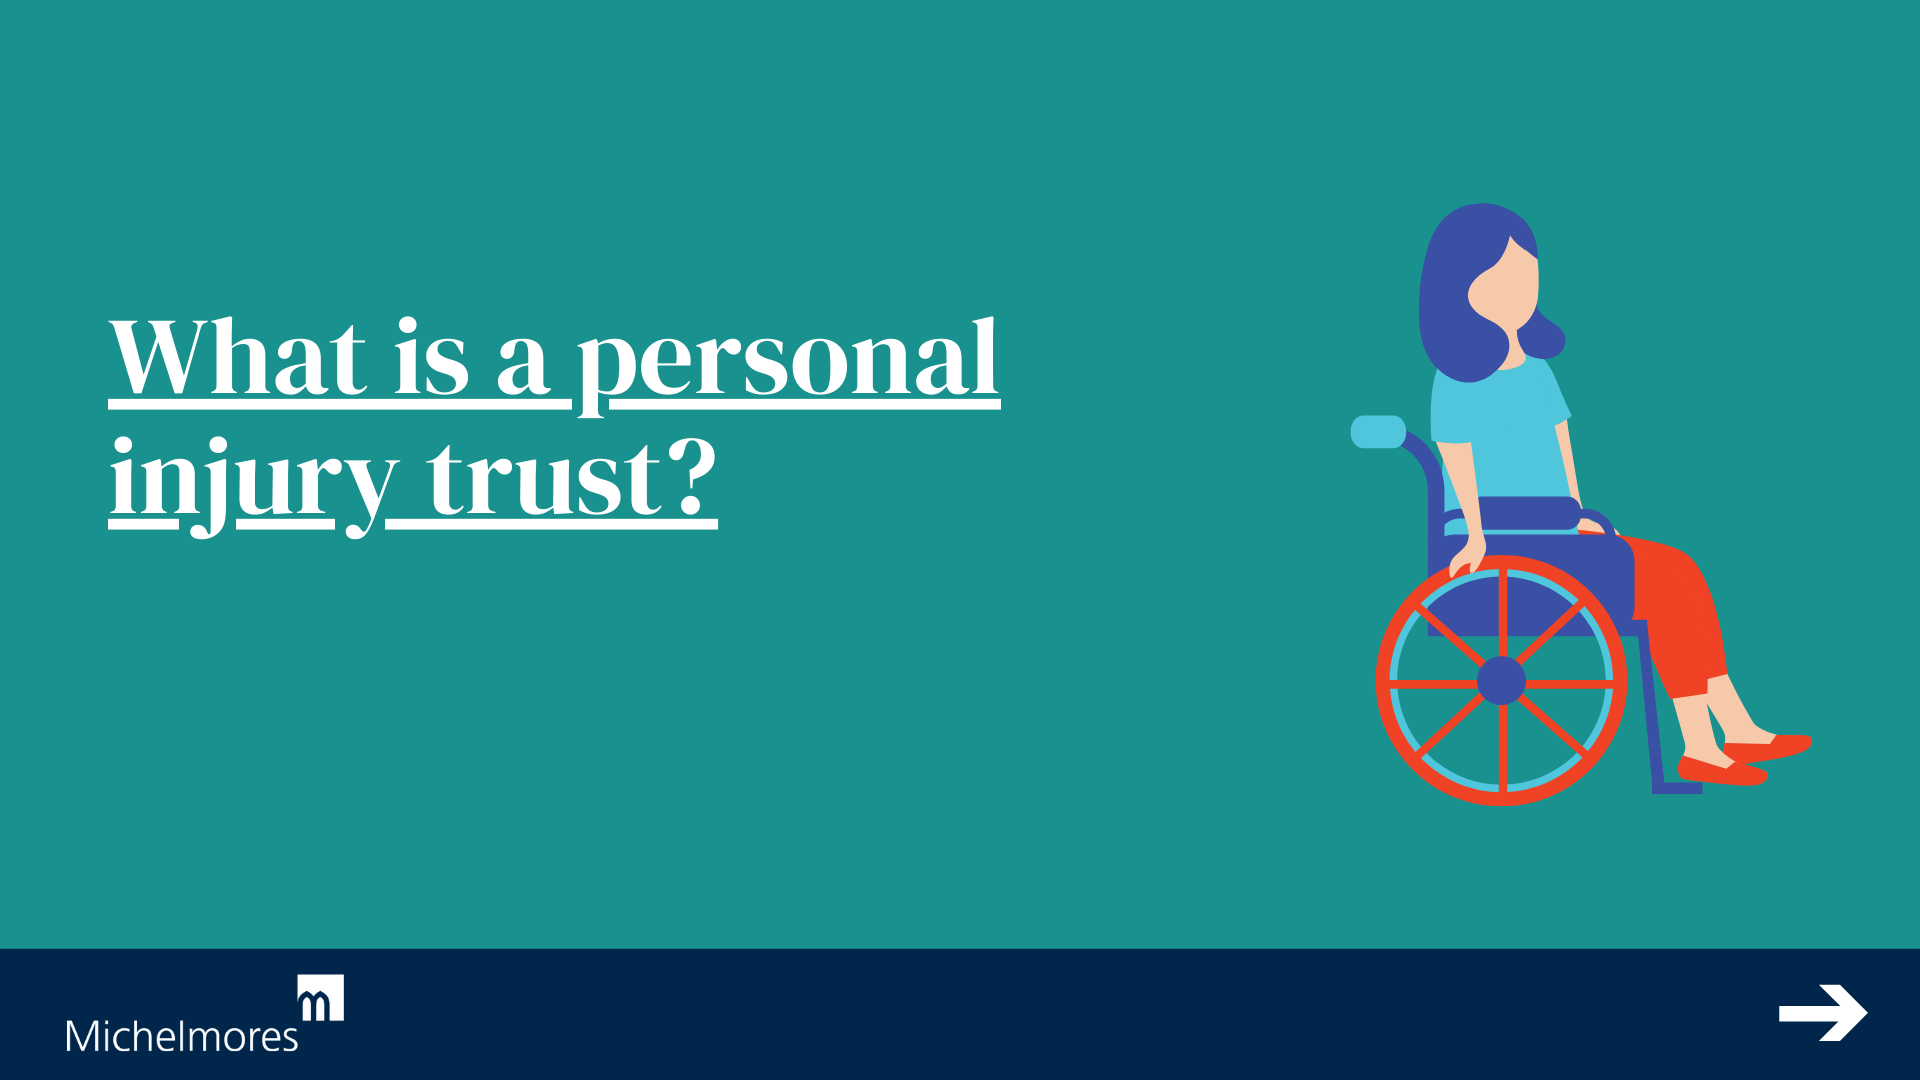 What is a personal injury trust?